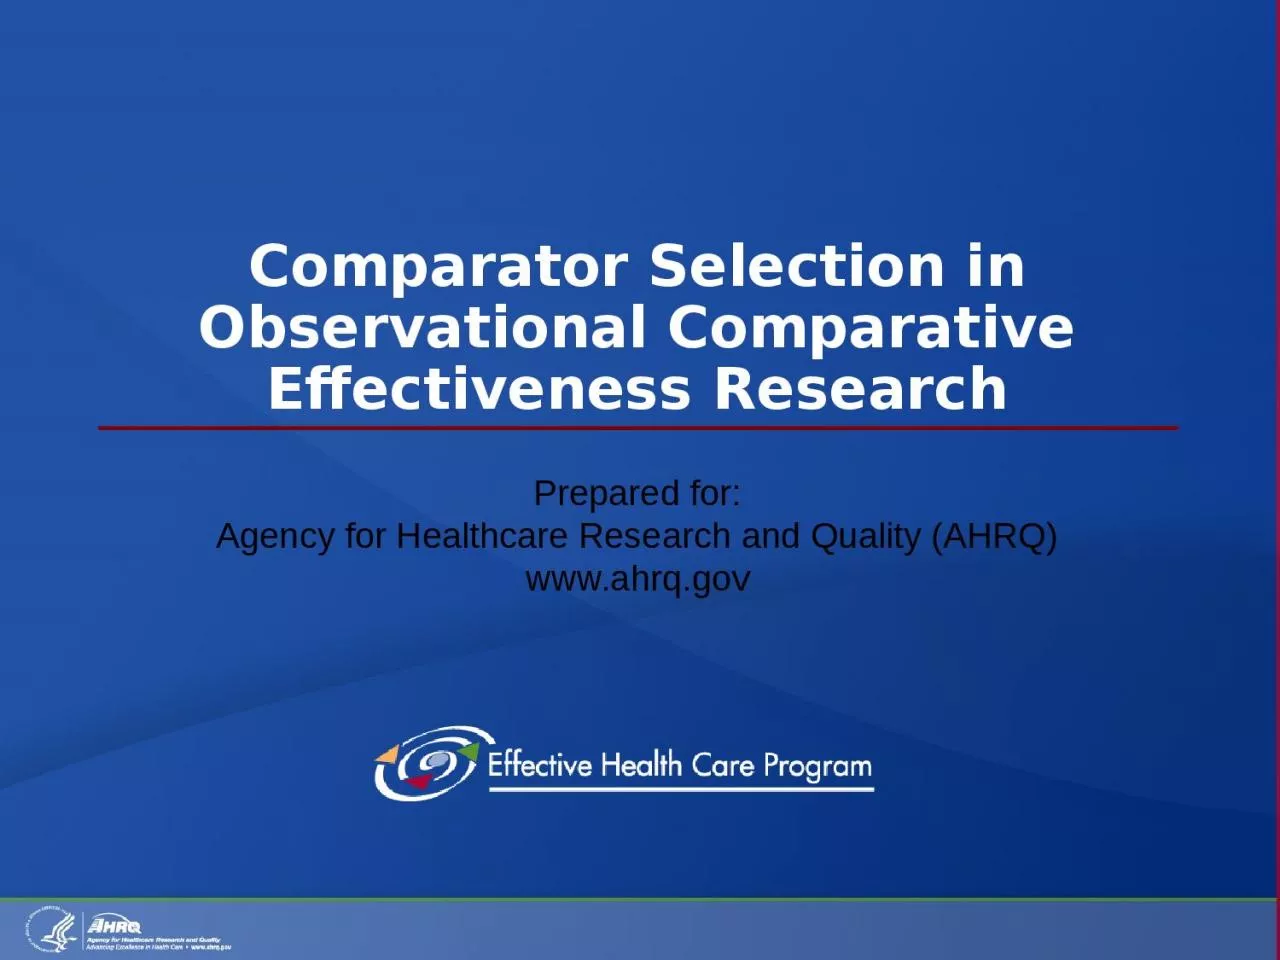 Comparator Selection in Observational Comparative Effectiveness Research